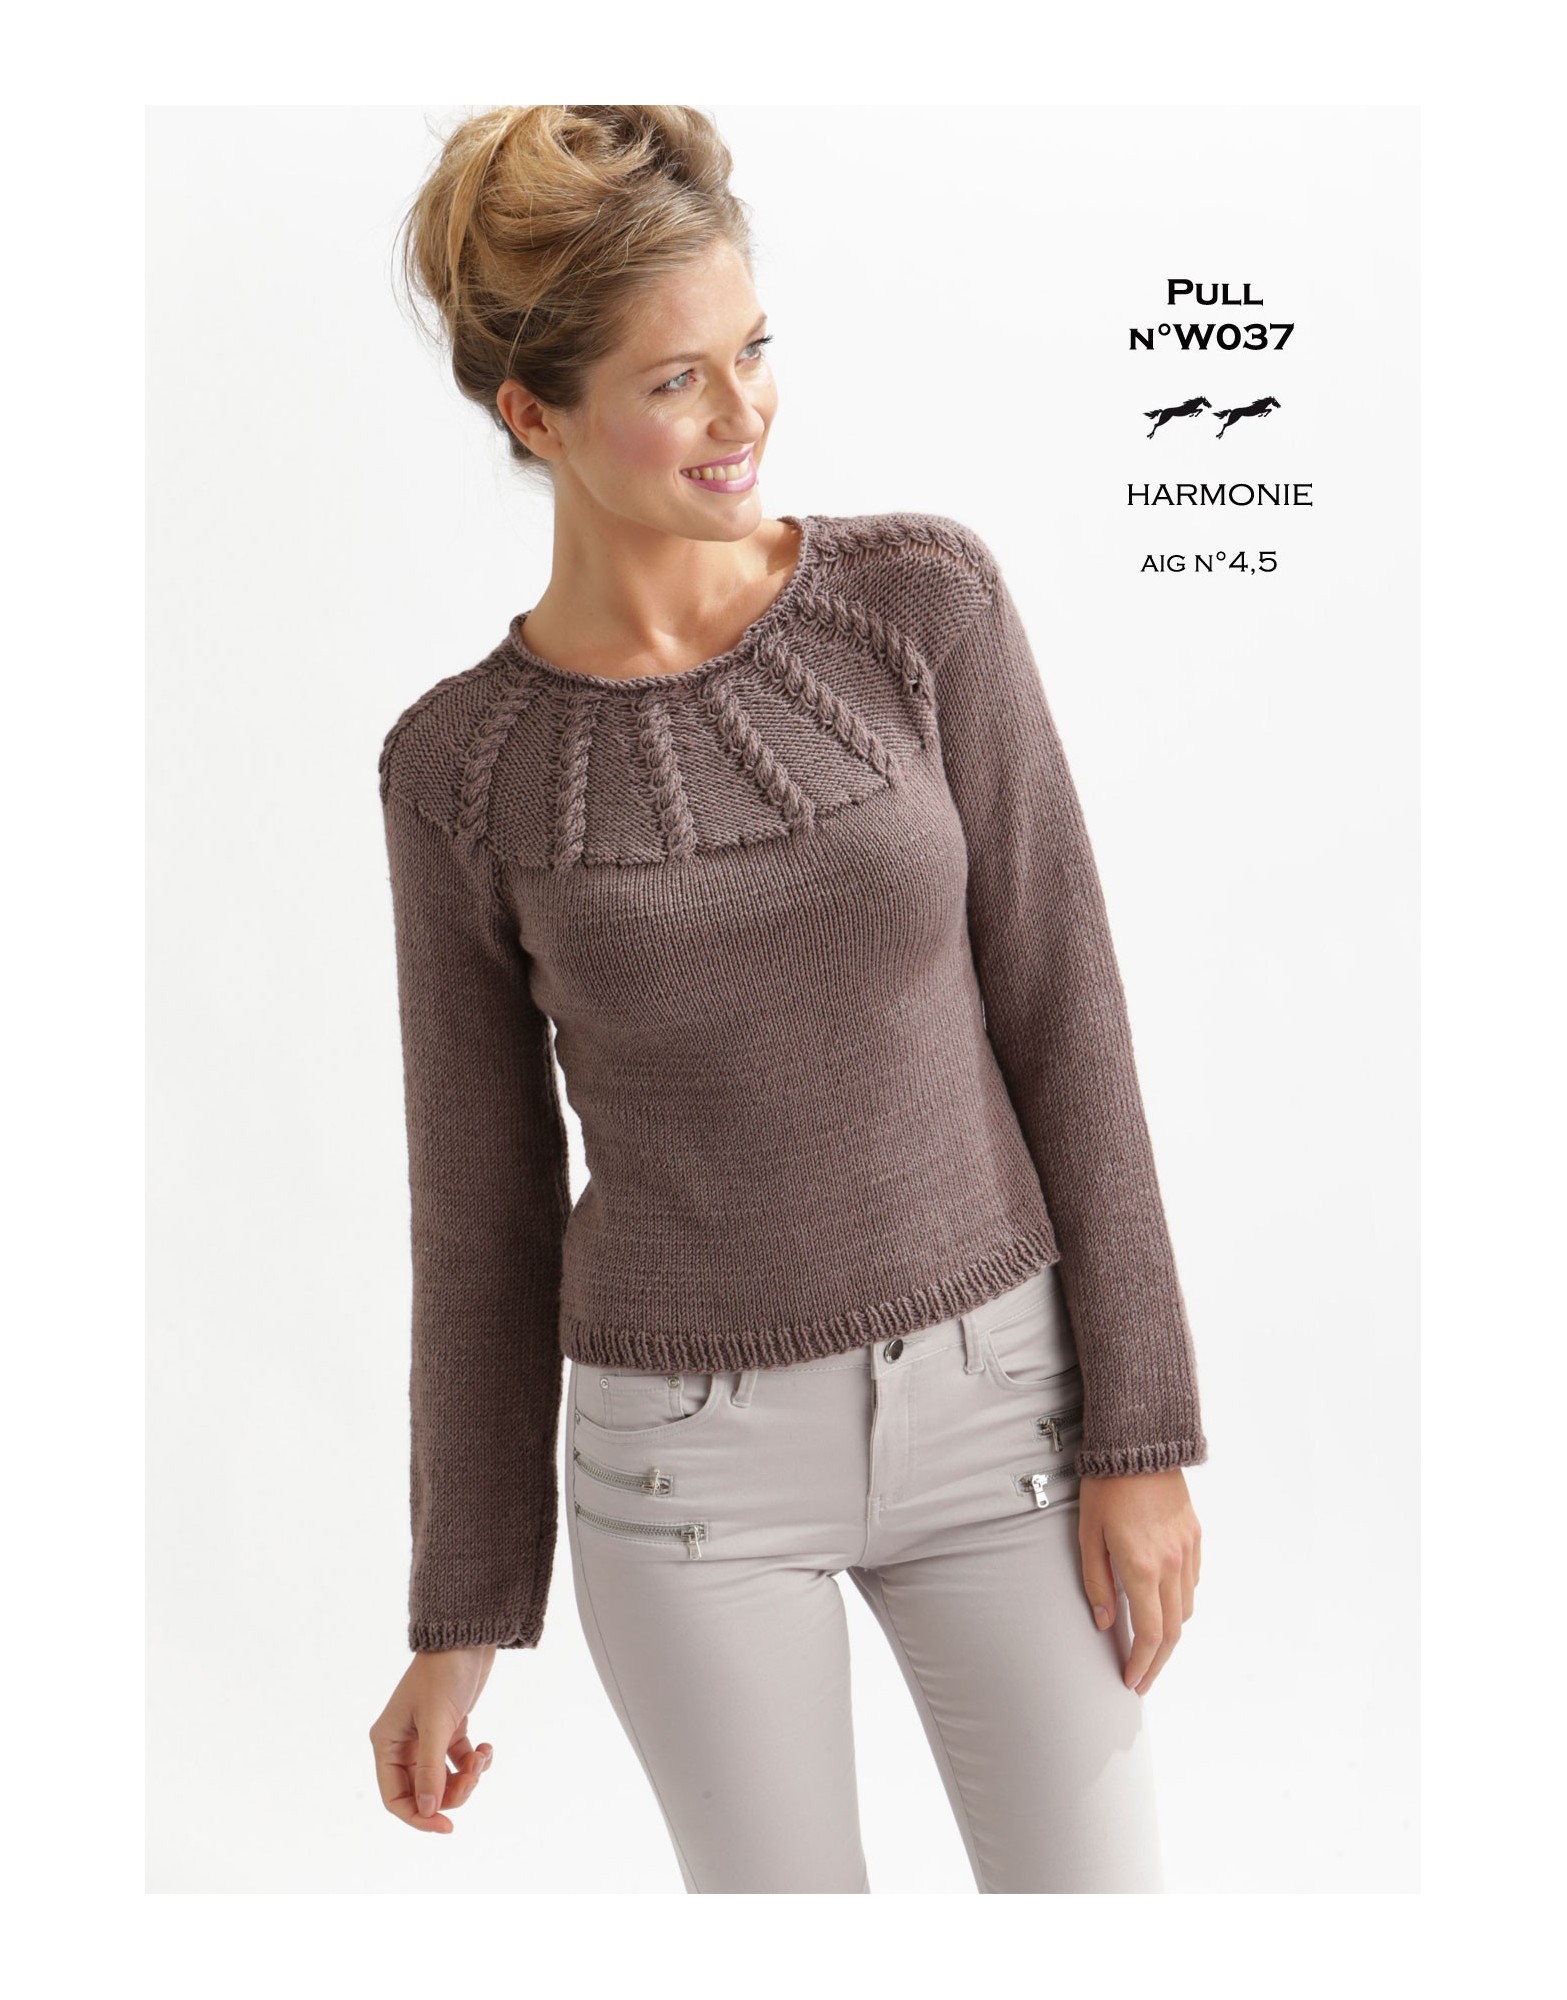 modele pull over femme a tricoter